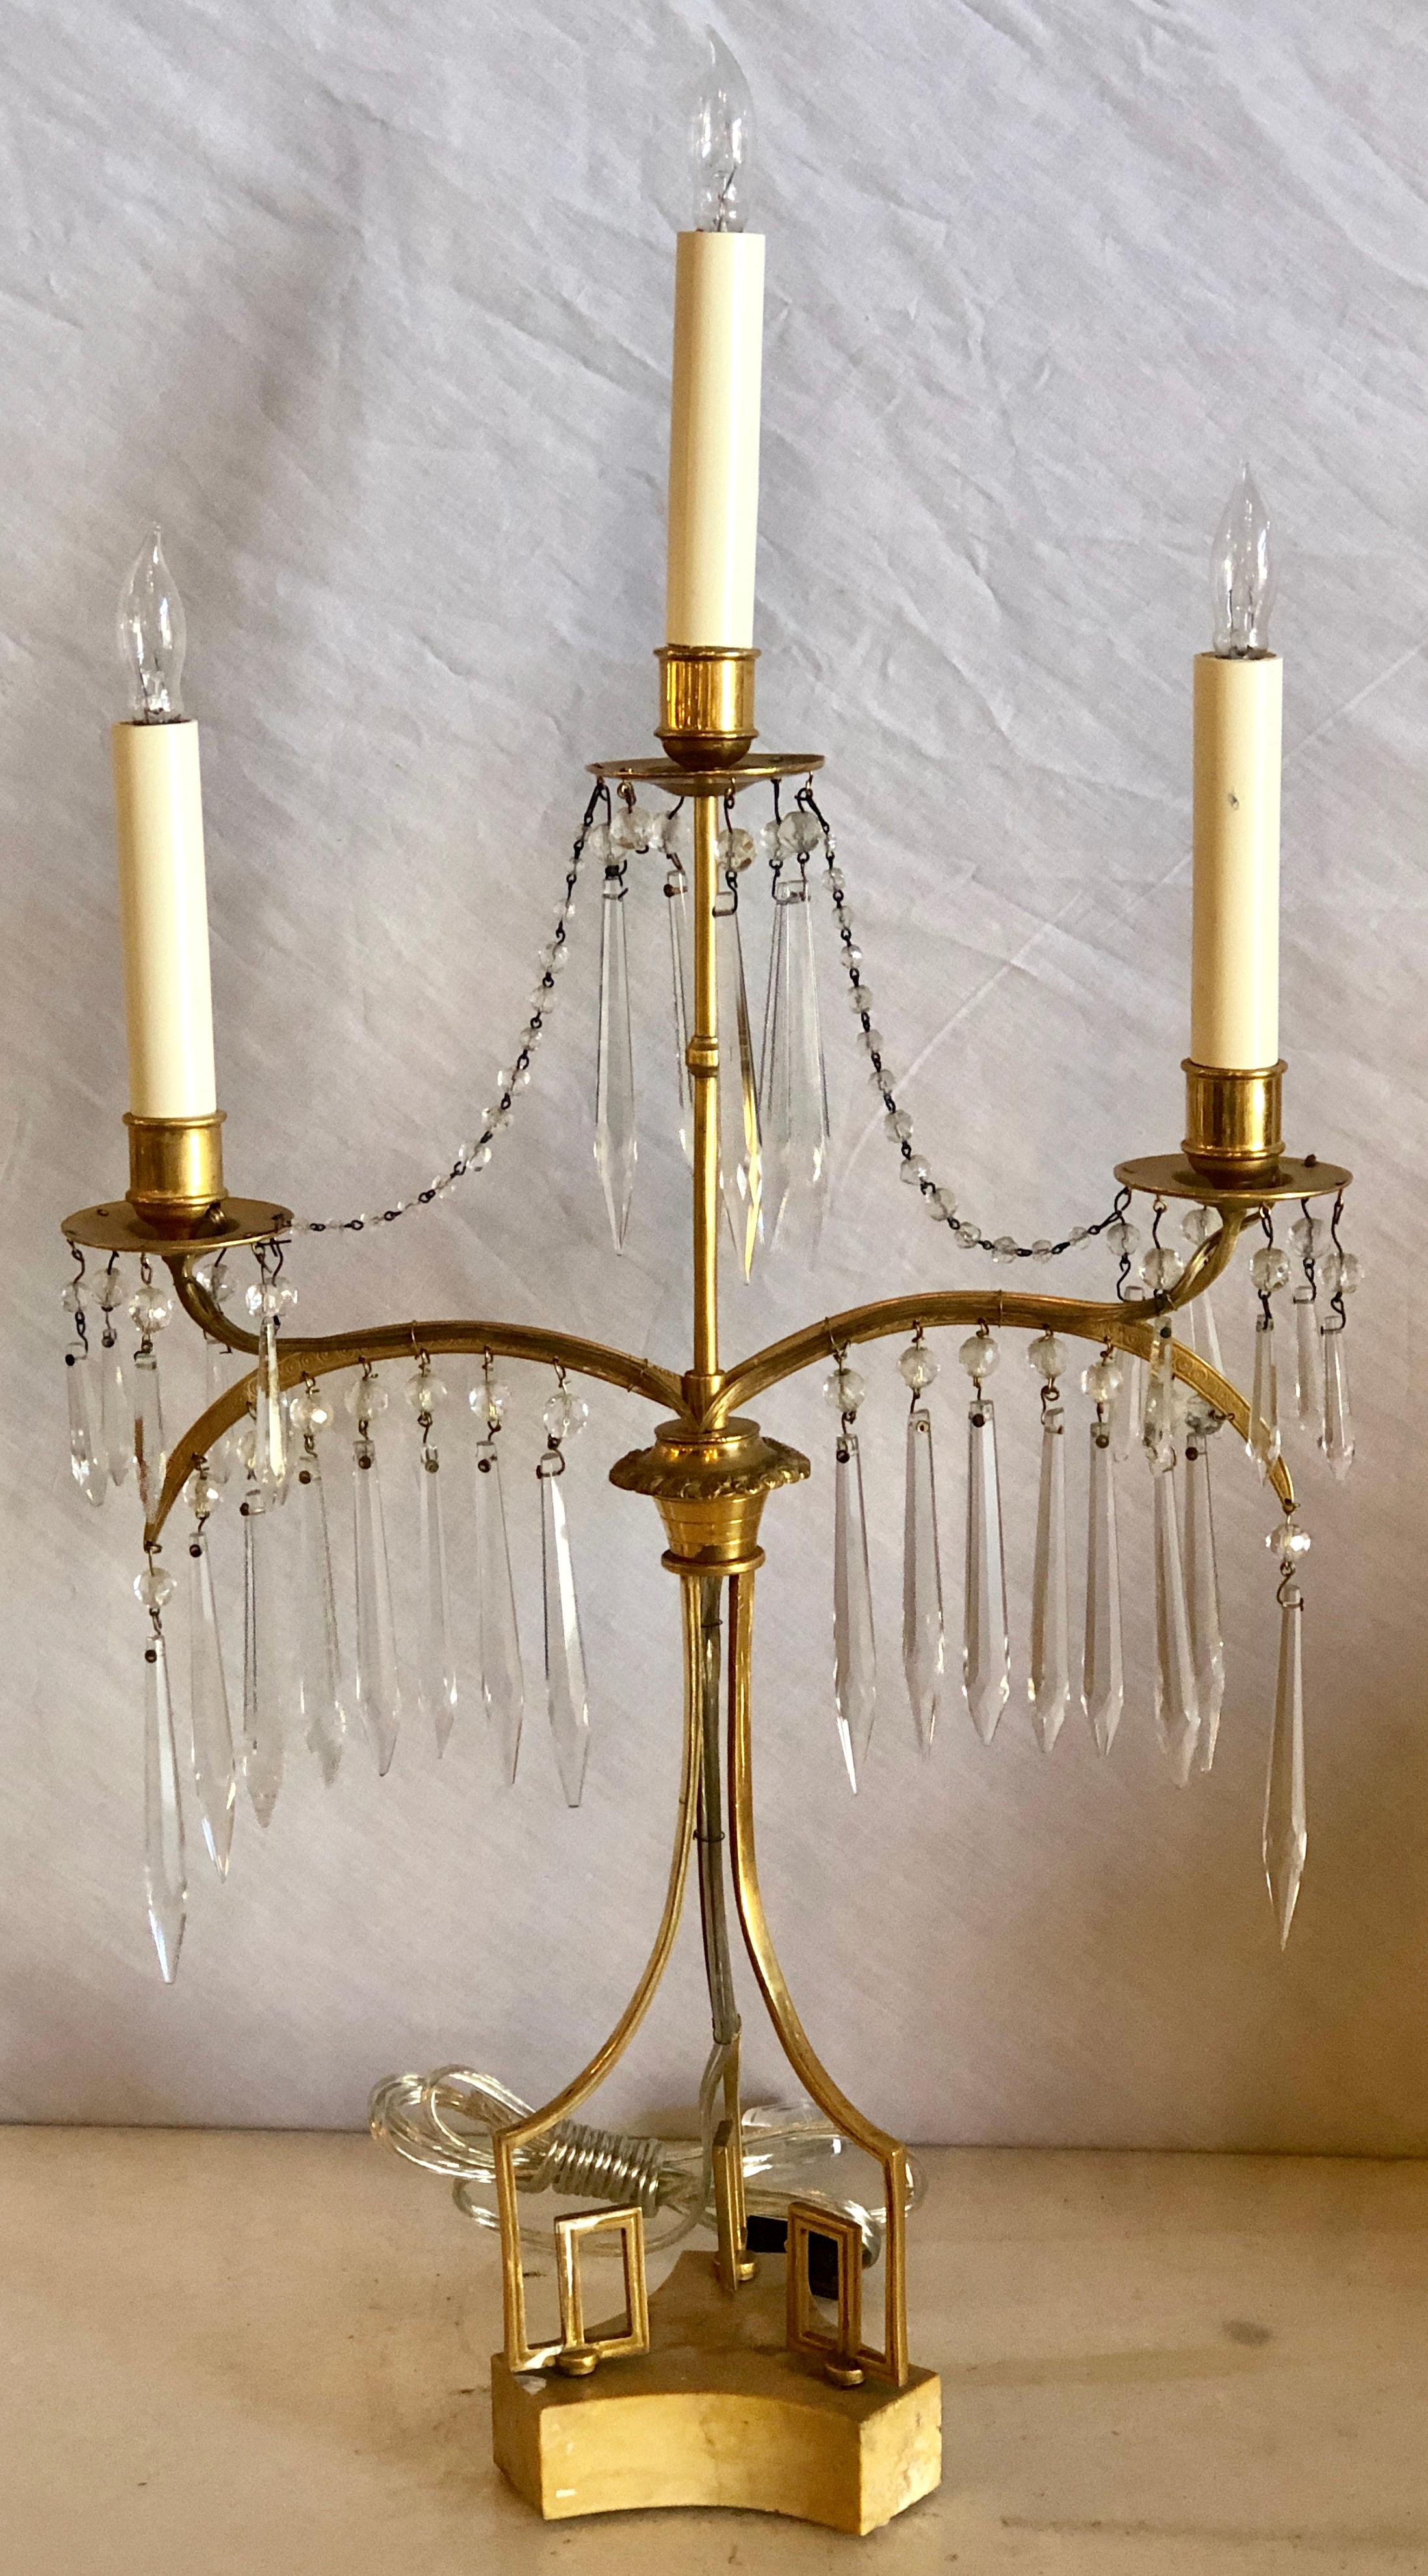 Pair of 19th century Russian neoclassical gilded bronze table lamps. These sleek and stylish table lamps are done in the candelabra style having three lights with finely cut crystals handing from the slender finely cast bodies supported by